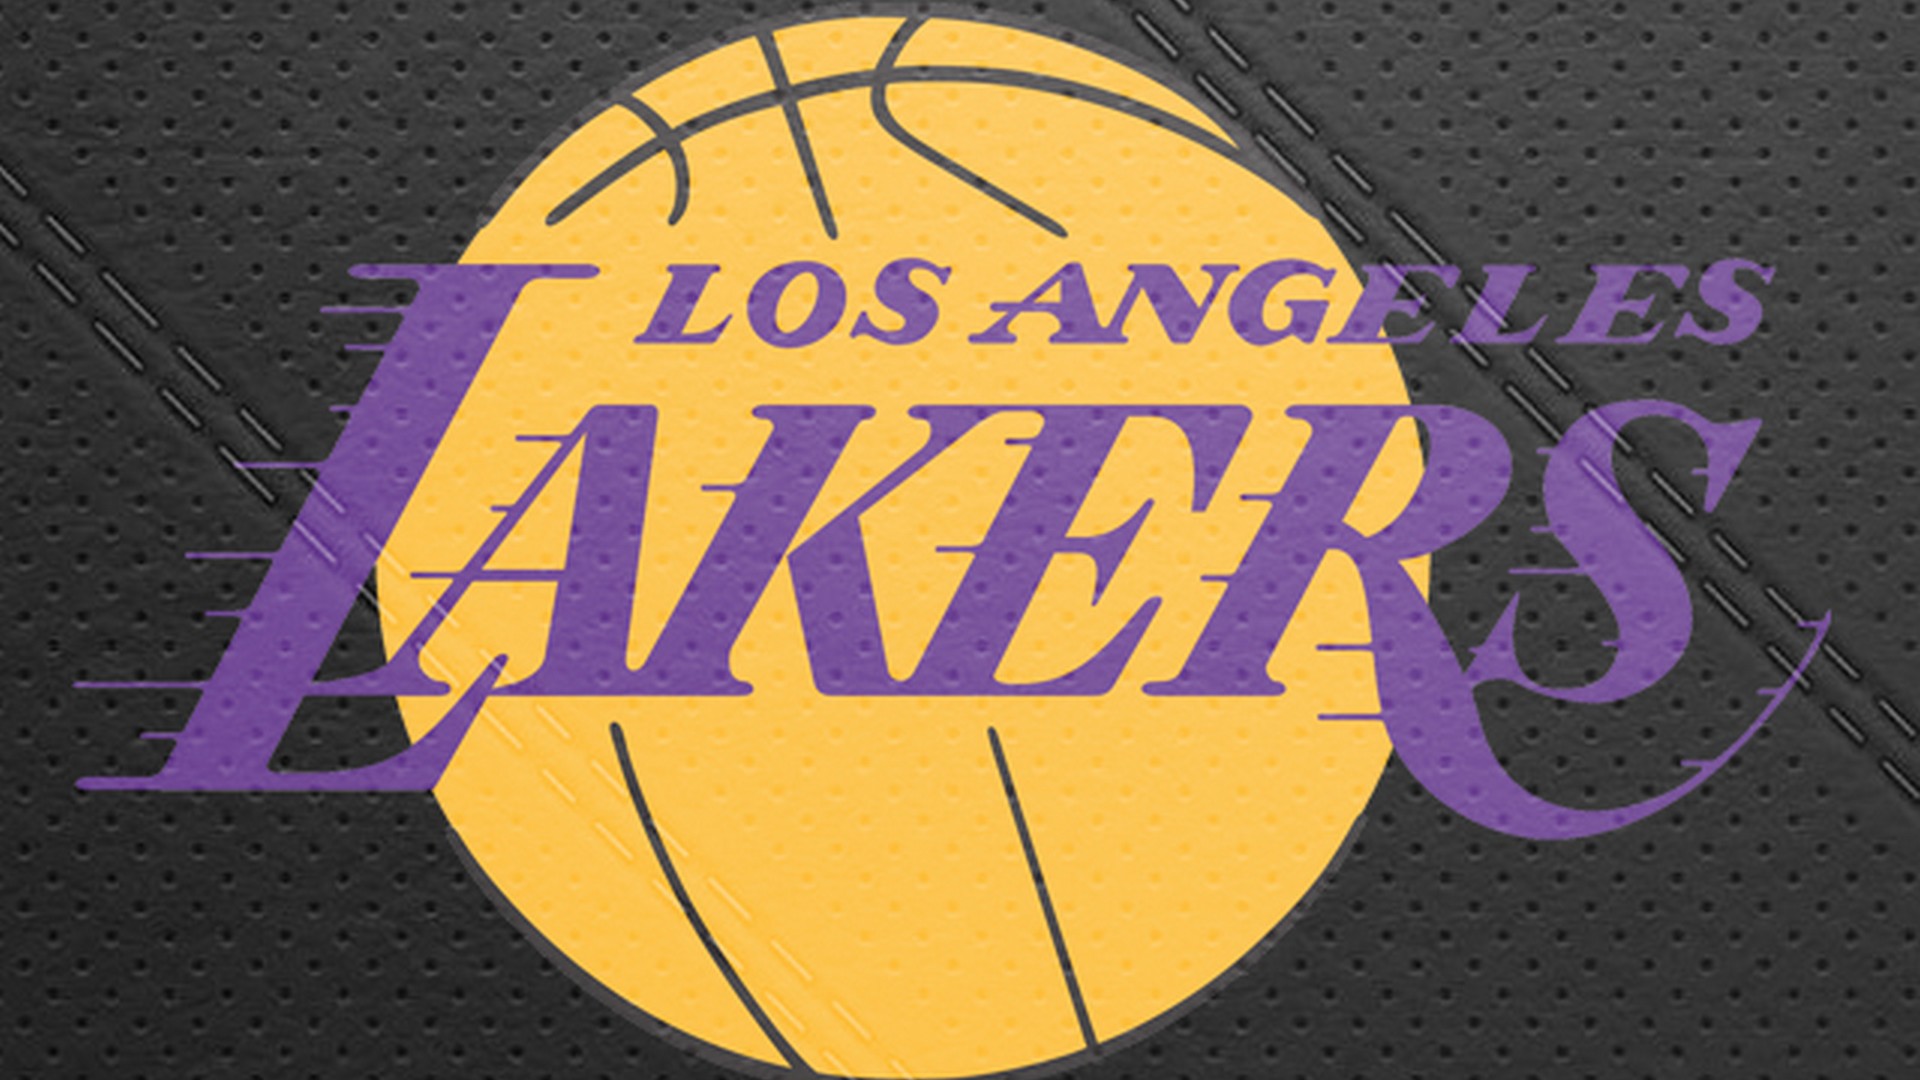 Wallpapers LA Lakers with image dimensions 1920X1080 pixel. You can make this wallpaper for your Desktop Computer Backgrounds, Windows or Mac Screensavers, iPhone Lock screen, Tablet or Android and another Mobile Phone device